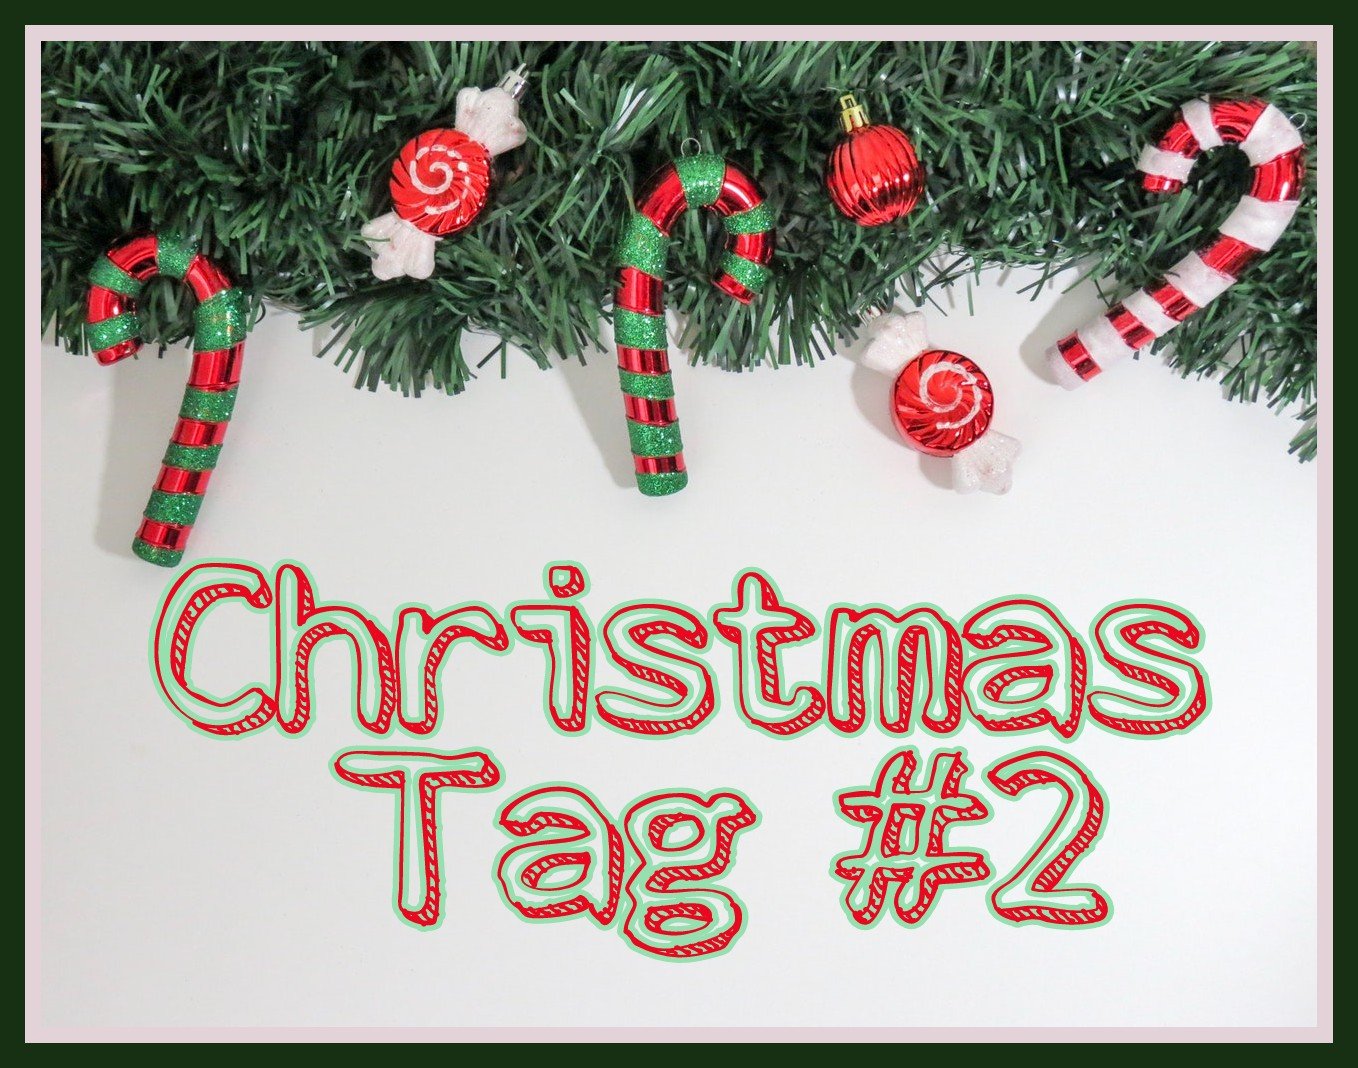 Christmas Tag #2 title on a Christmas themed background with candy canes and sweets.